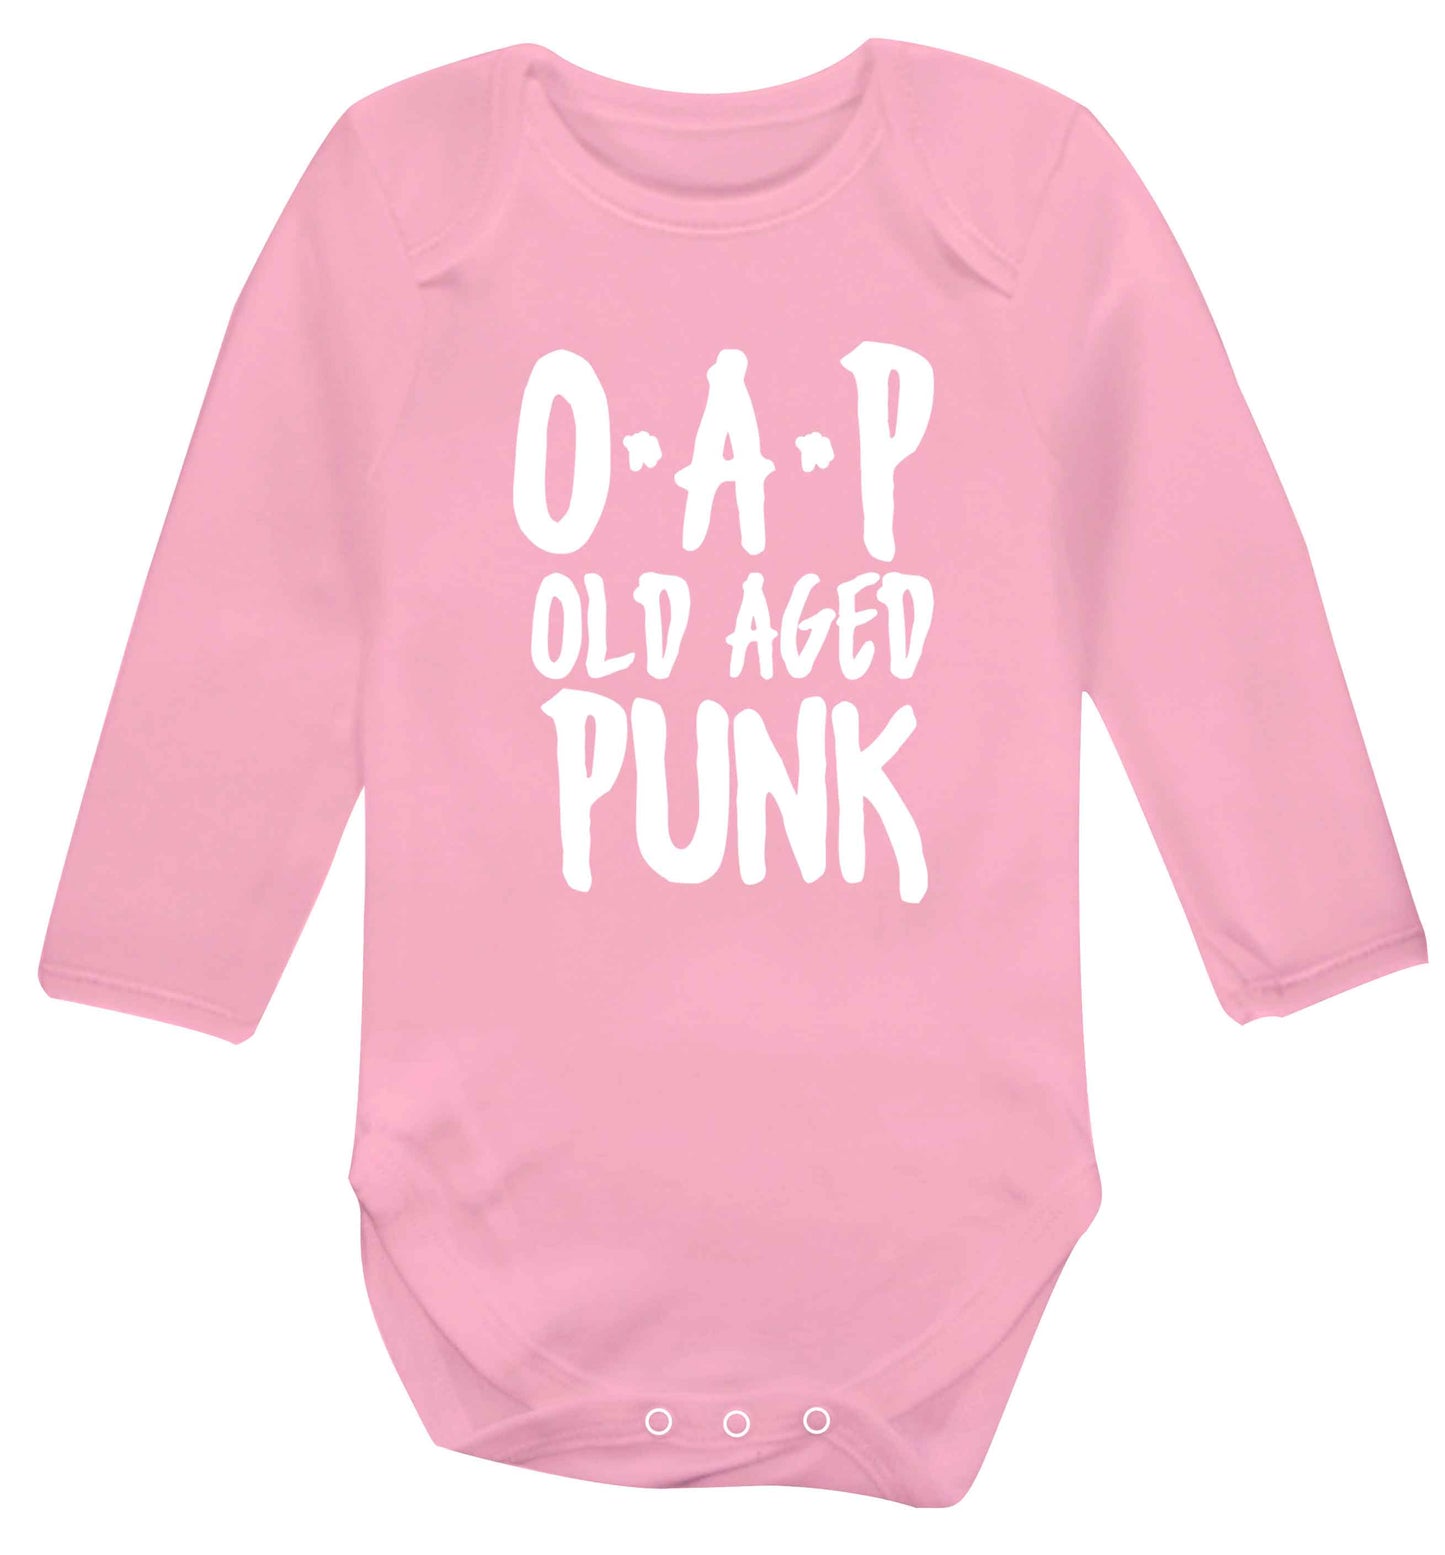 O.A.P Old Age Punk Baby Vest long sleeved pale pink 6-12 months